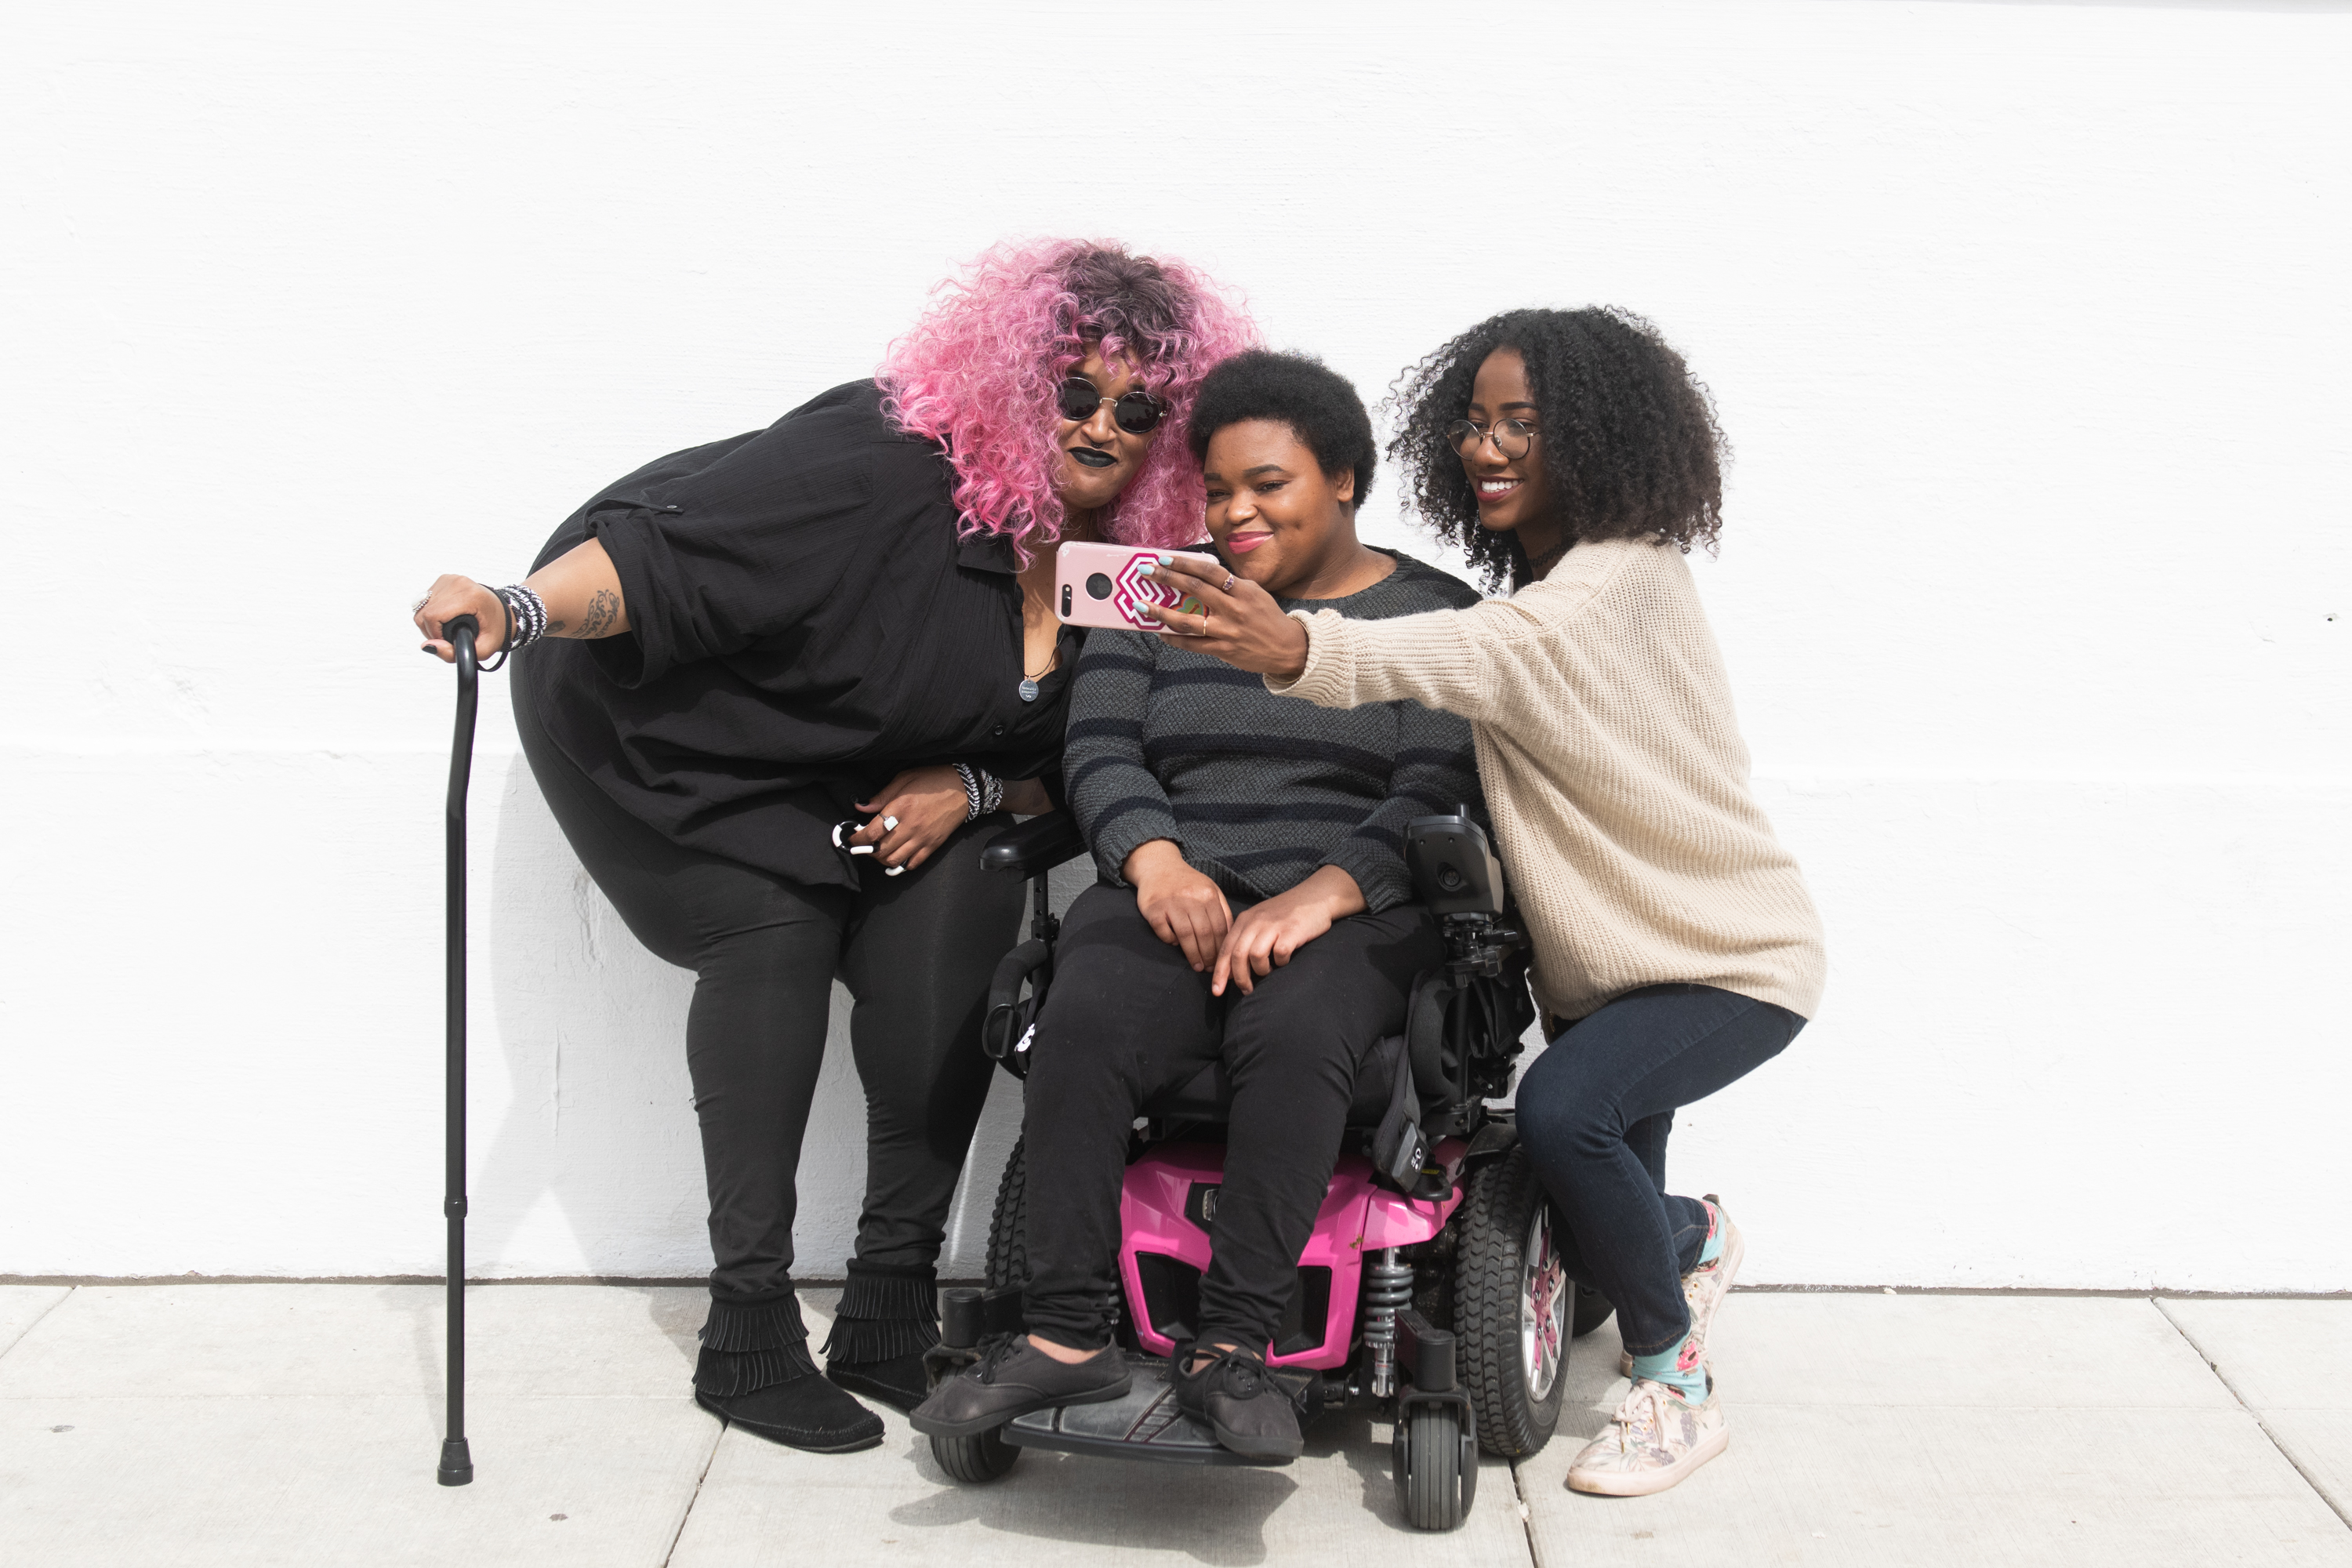 A zoomed out full body shot showing three Black and disabled friends (a non-binary person with a cane and tangle stim toy, a non-binary person sitting in a power wheelchair, and an invisibly disabled femme) smiling and taking a cell phone selfie together. All are outdoors in front of a white wall. Attribution: Disabled and Here Collection.